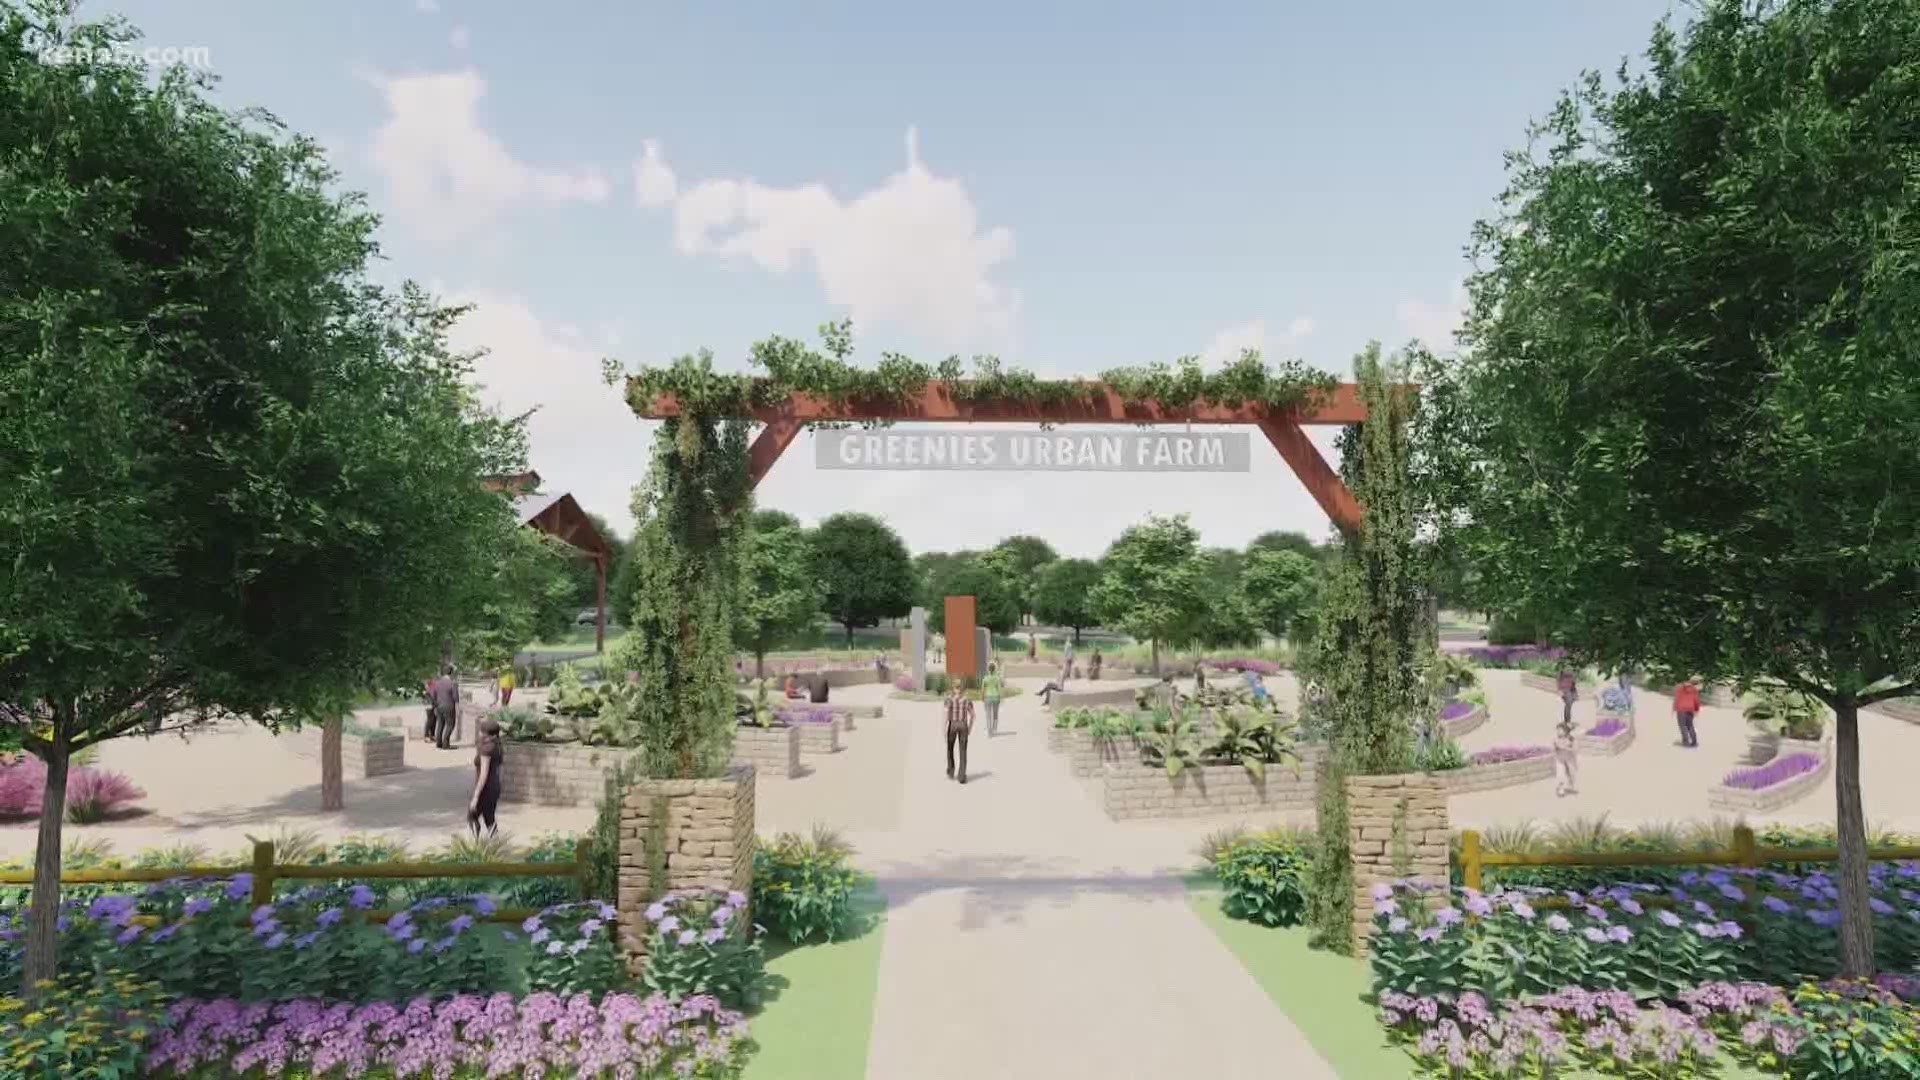 A new urban farm & event center on Bexar County's east side is getting more than $2 million to fast track its opening. The land will feed people in more ways than 1.